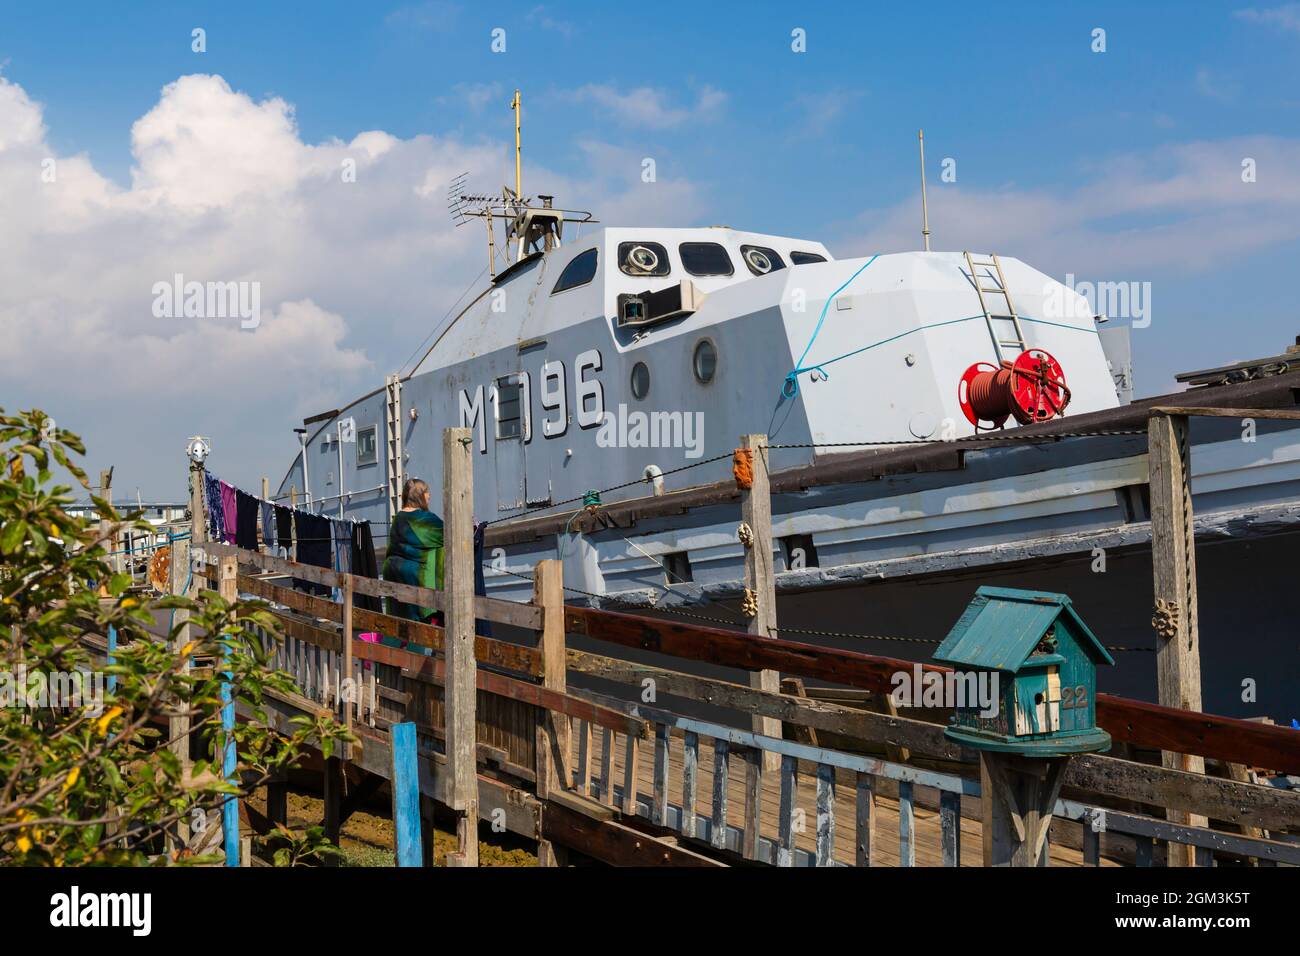 Shoreham-On-Sea, West Sussex UK. 16th September 2021. UK weather: warm and sunny at Shoreham-On-Sea, Shoreham By Sea, with unusual colourful houseboats on the estuary of the River Adur contrasting against the blue sky. Credit: Carolyn Jenkins/Alamy Live News Stock Photo